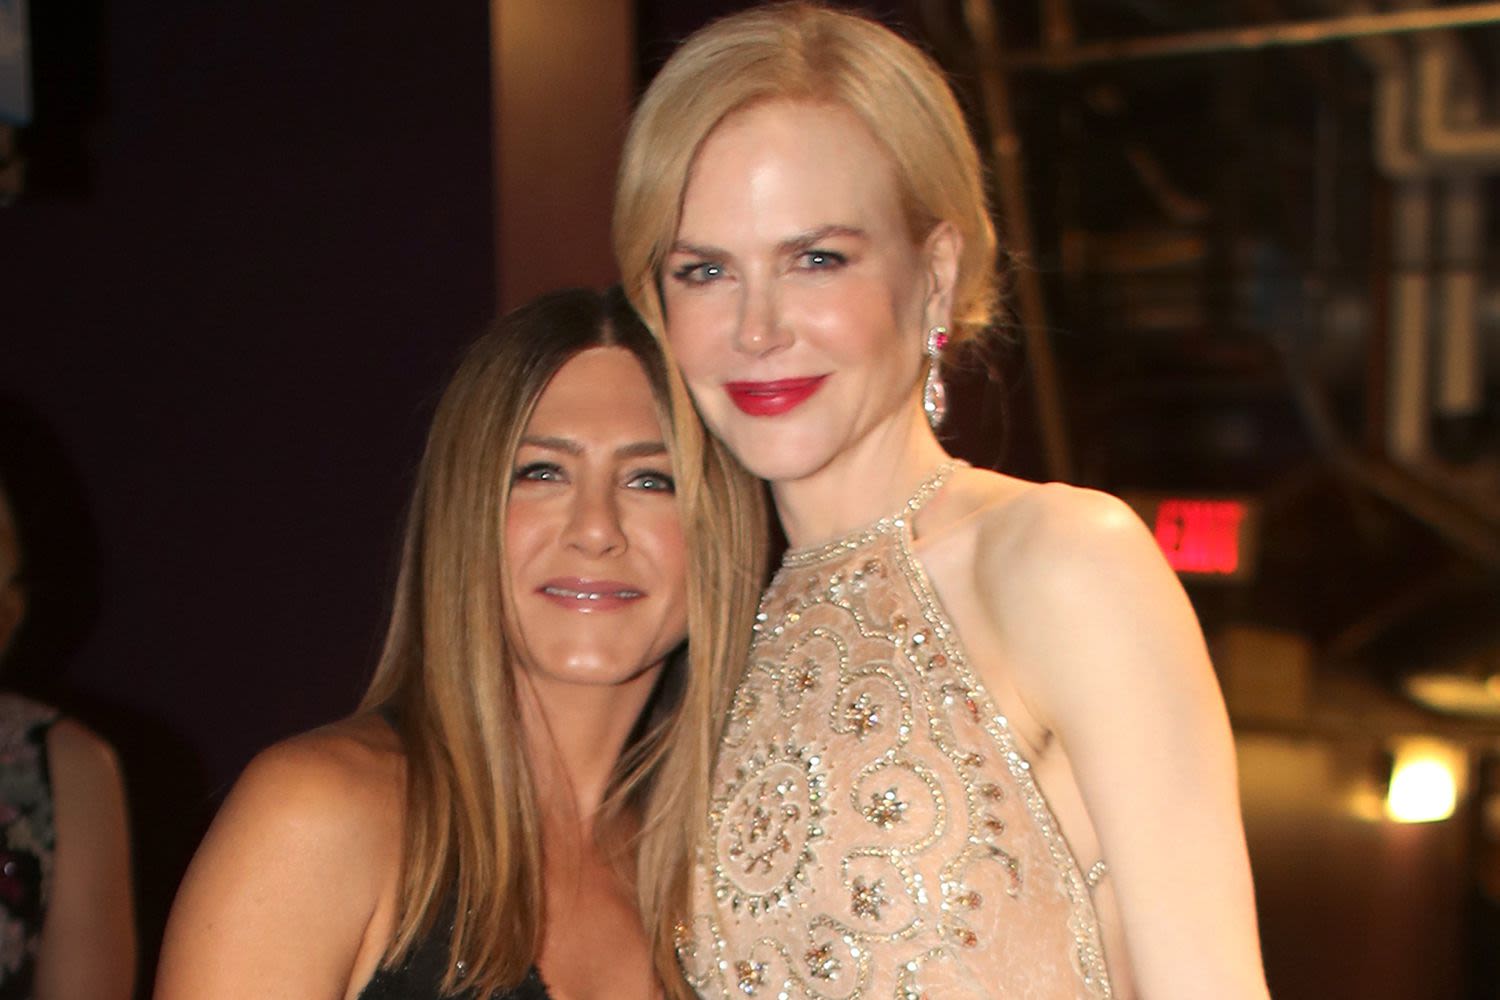 Jennifer Aniston Says Nicole Kidman Helped Her Through 'a Lot of Hard Things' While Making 'Just Go with It'